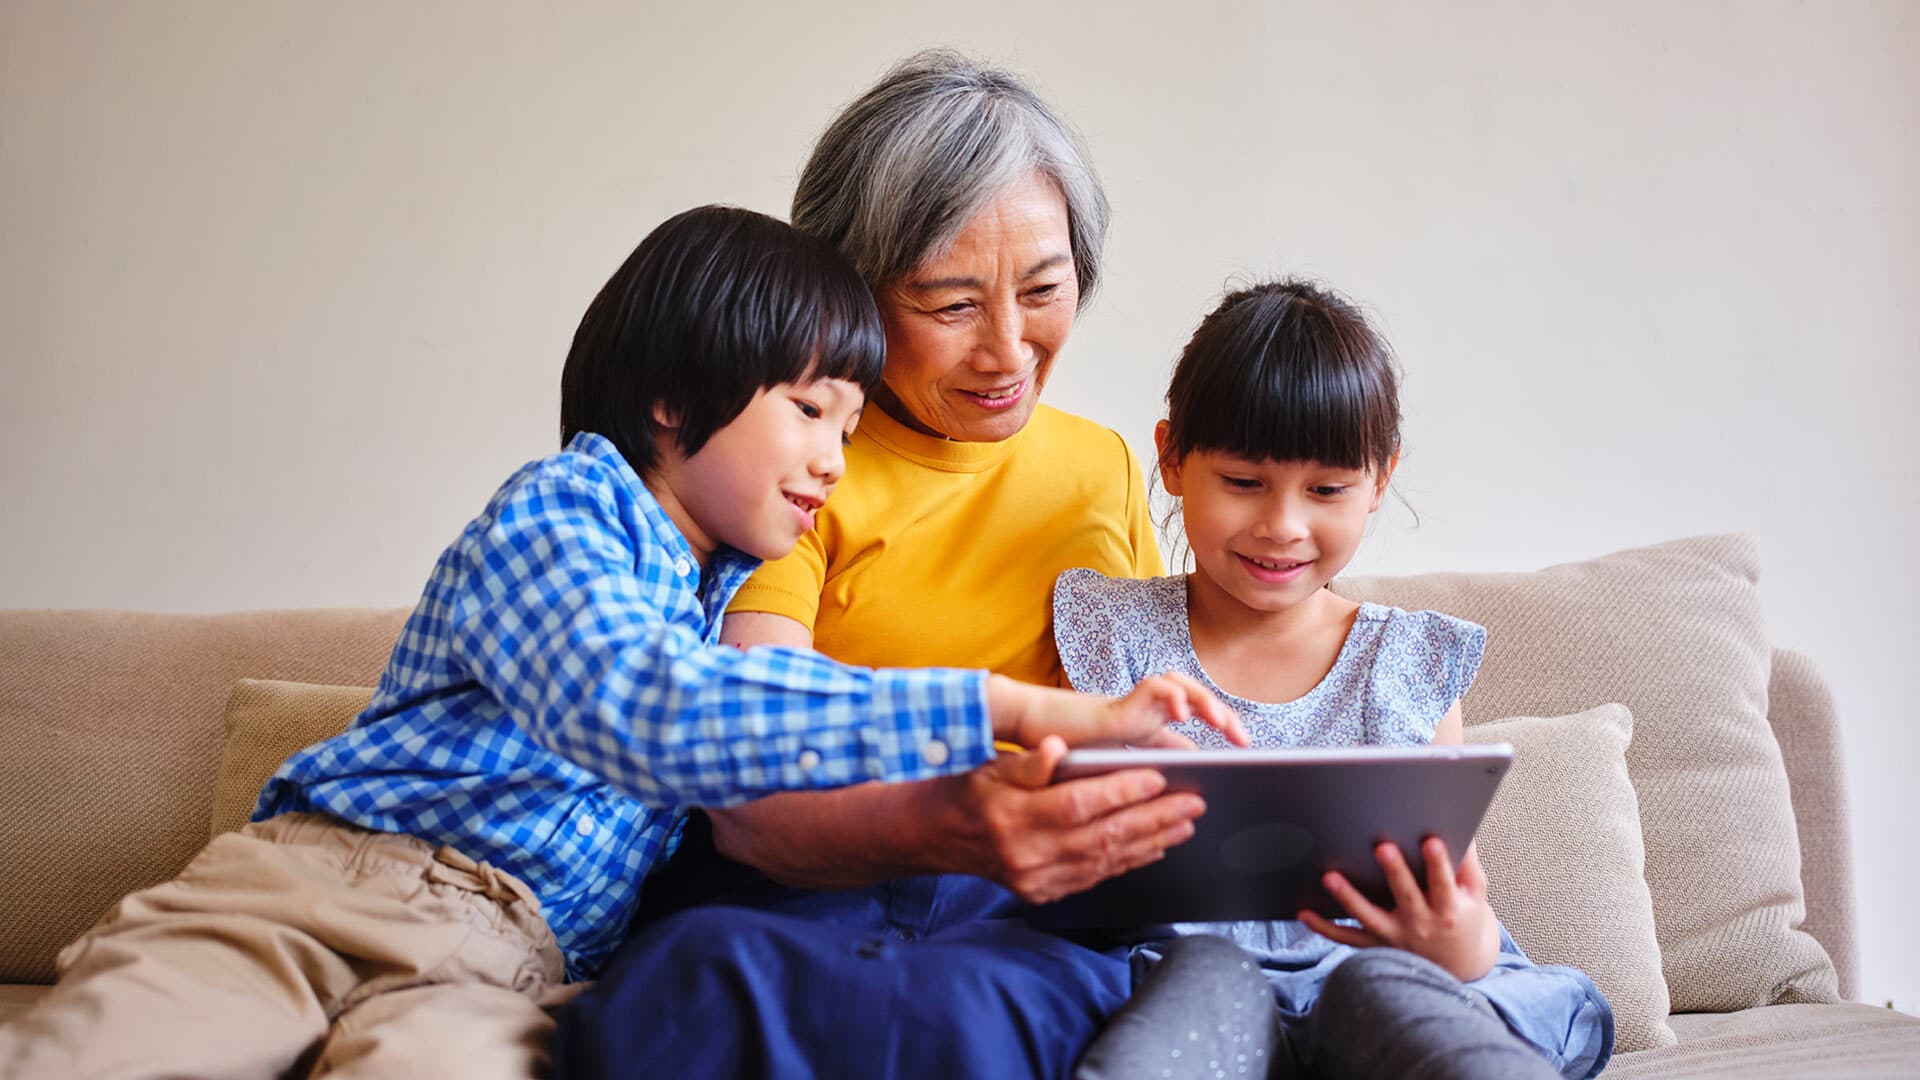 A grandmother looks at a tablet with two children